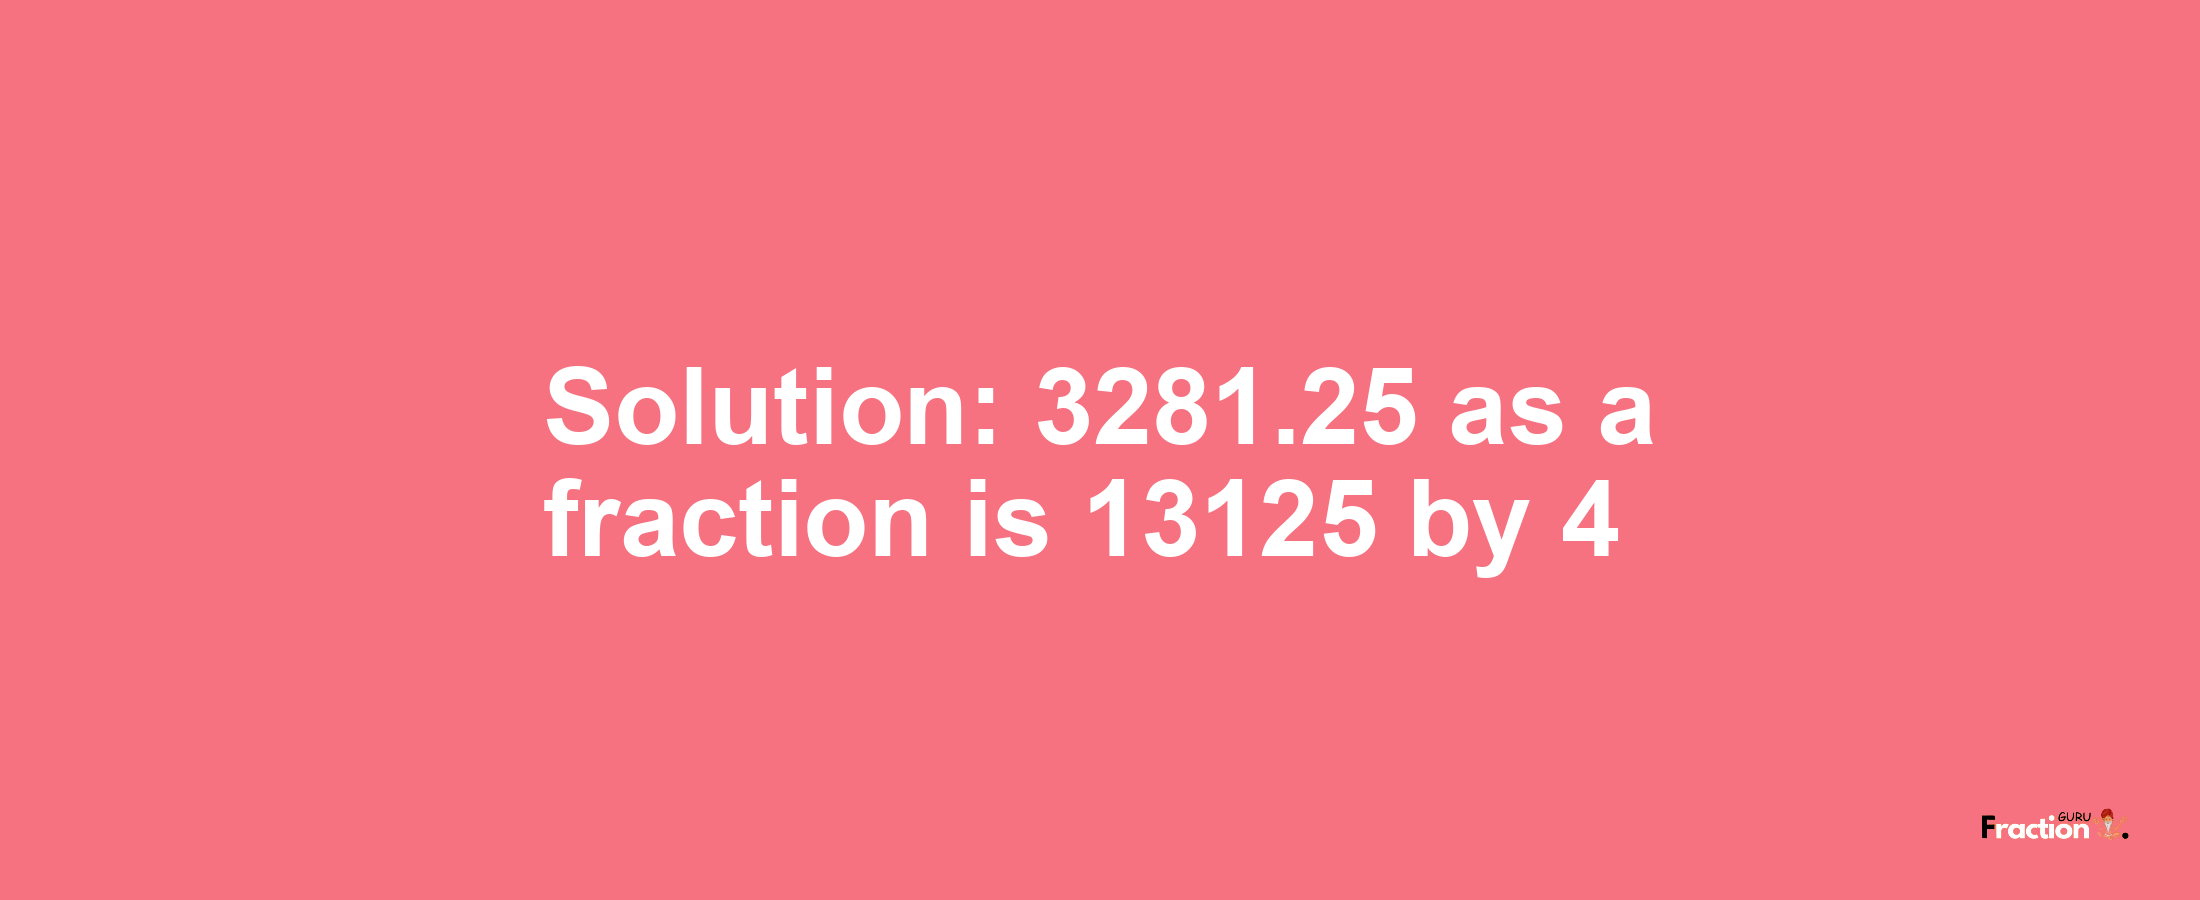 Solution:3281.25 as a fraction is 13125/4